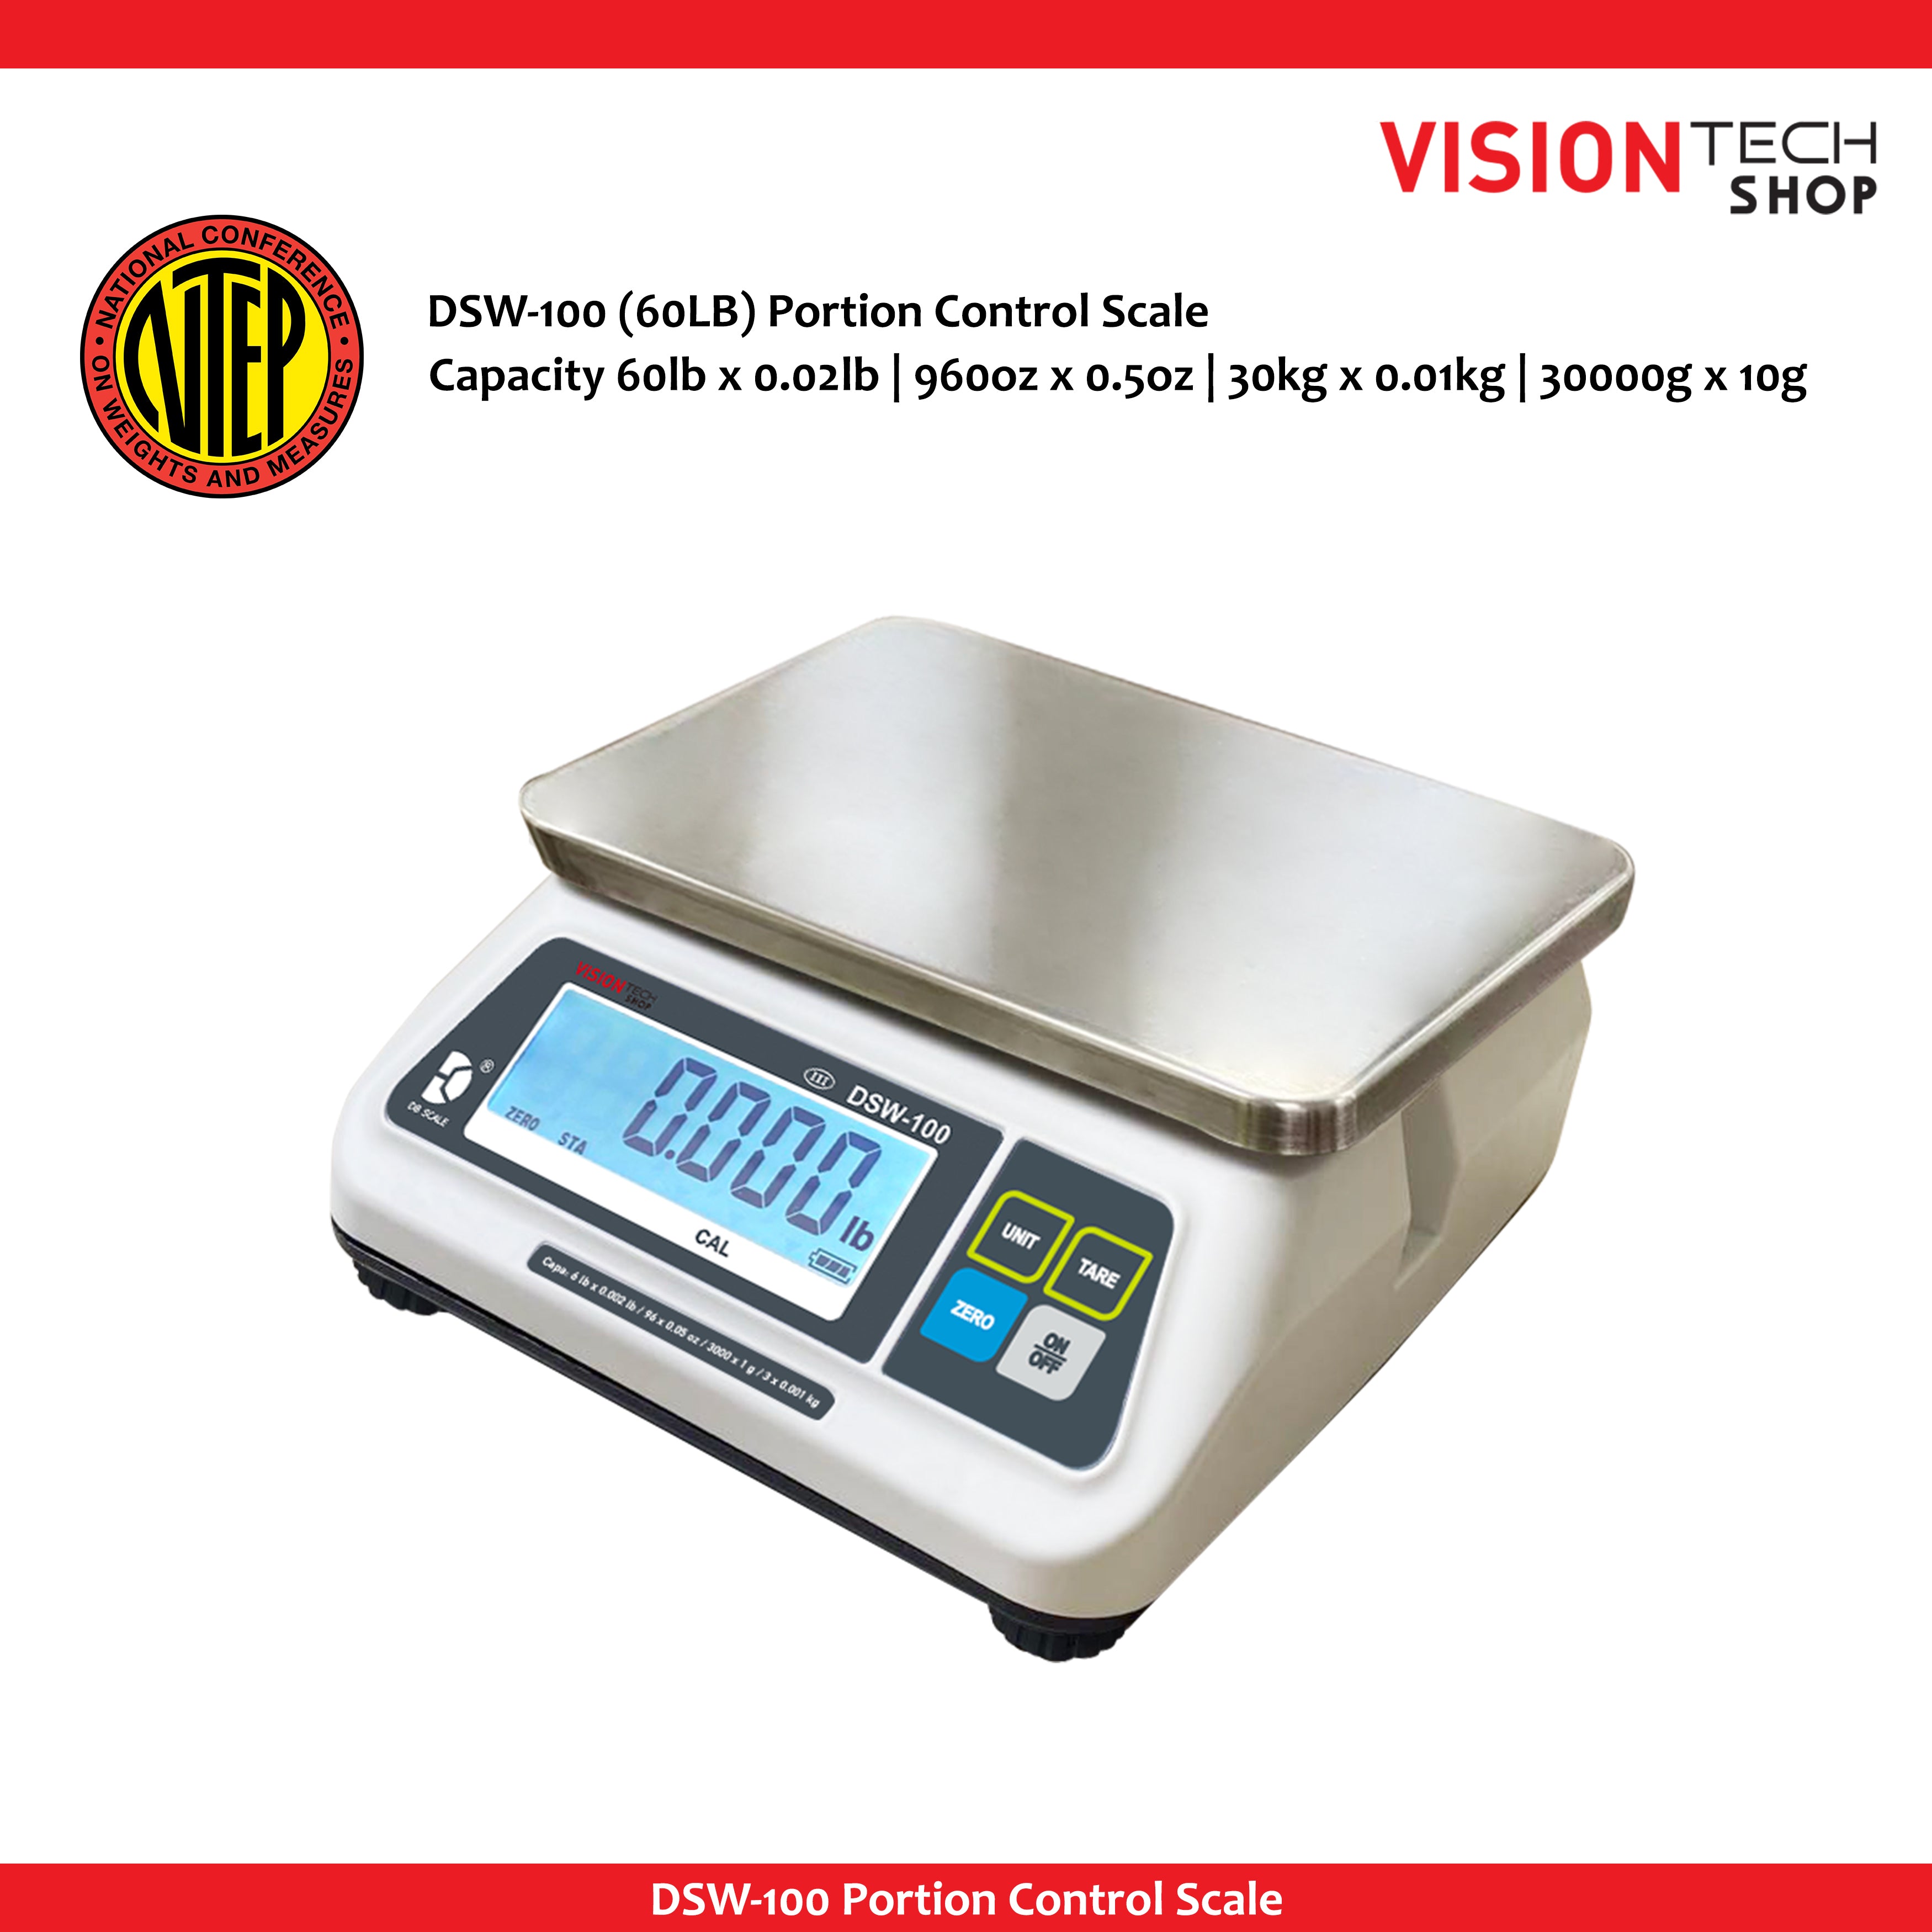 DSW-100 Portion Scale (Dual Display)